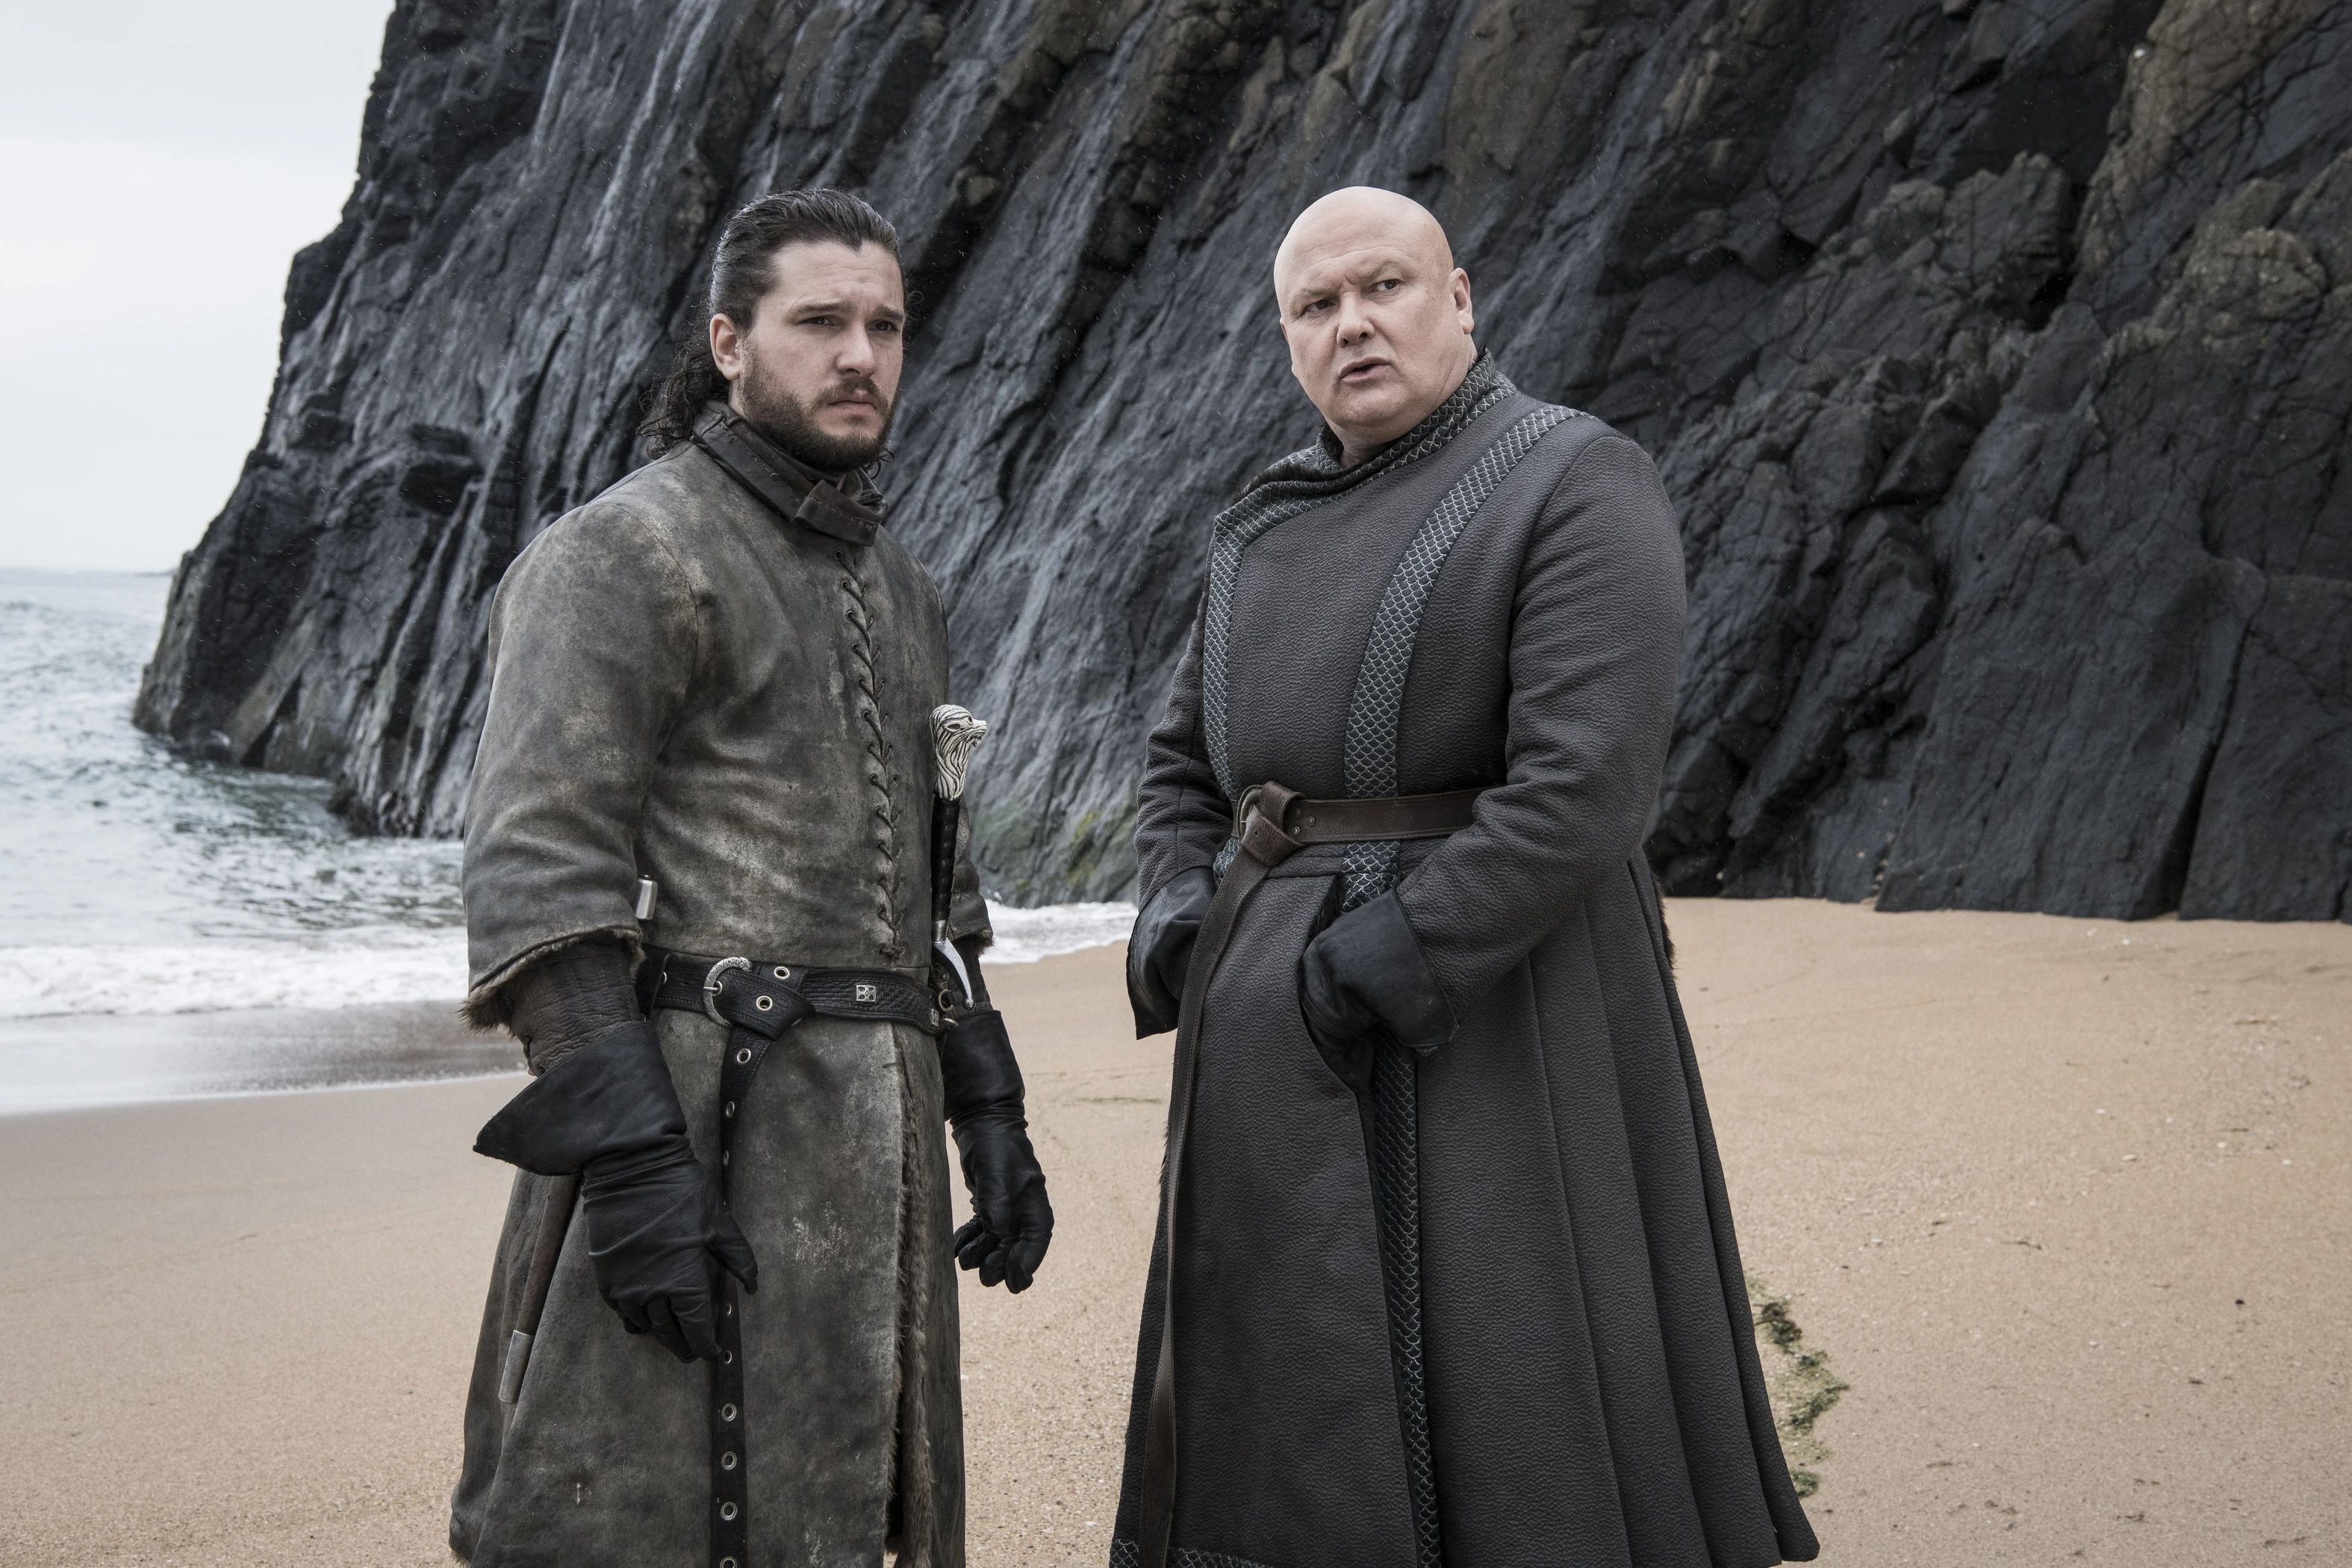 Conleth Hill as Varys talking to Jon Snow in Game of Thrones.